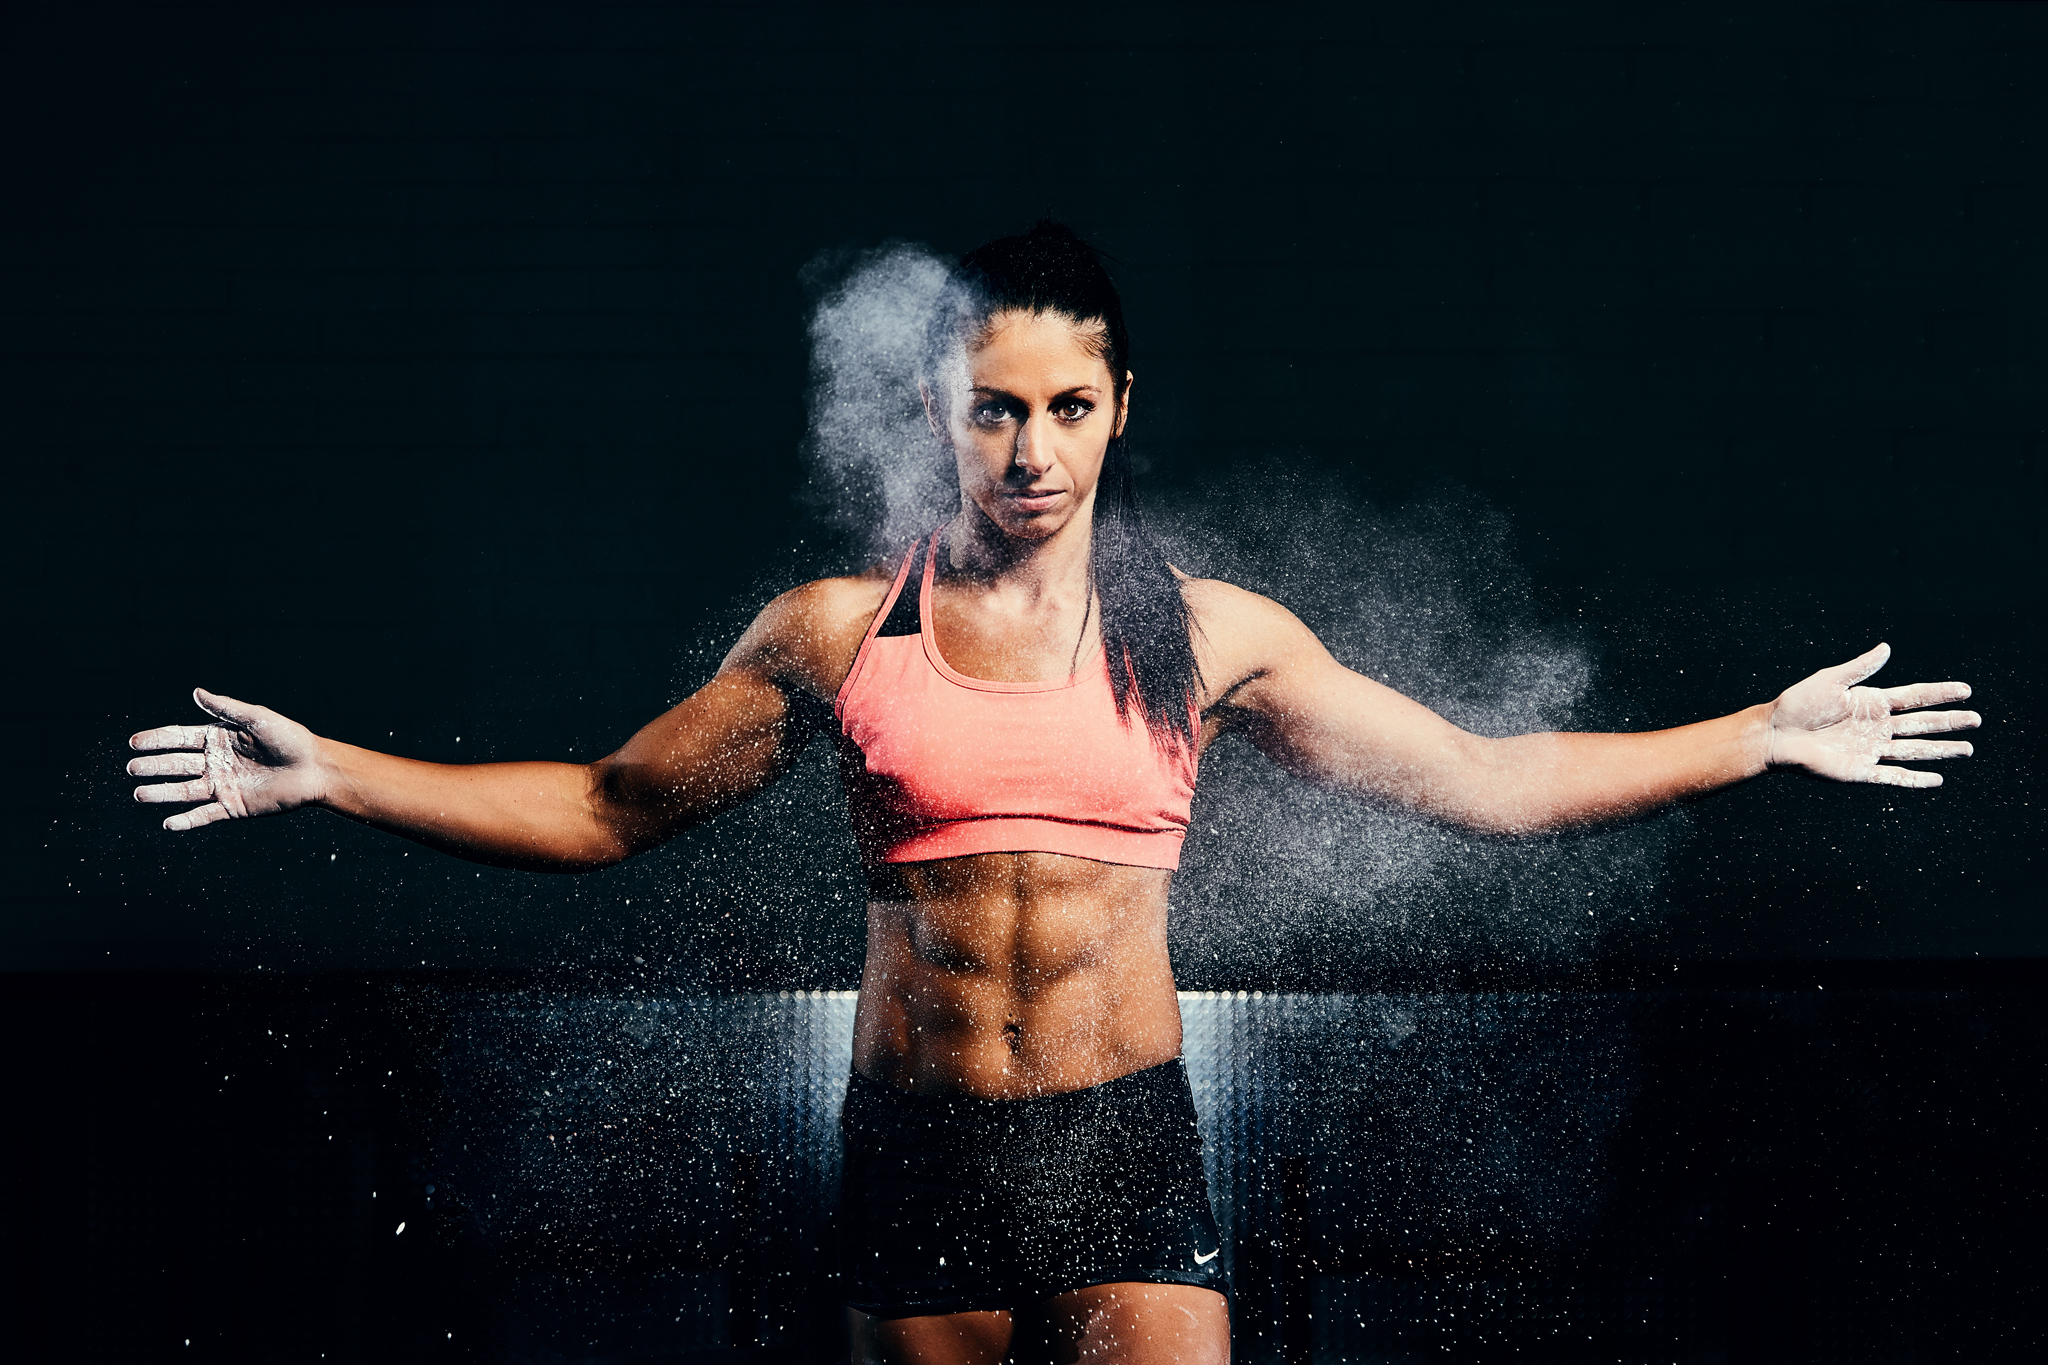 Fitness Competitor Photoshoot - chalk clapping - April Bleicher